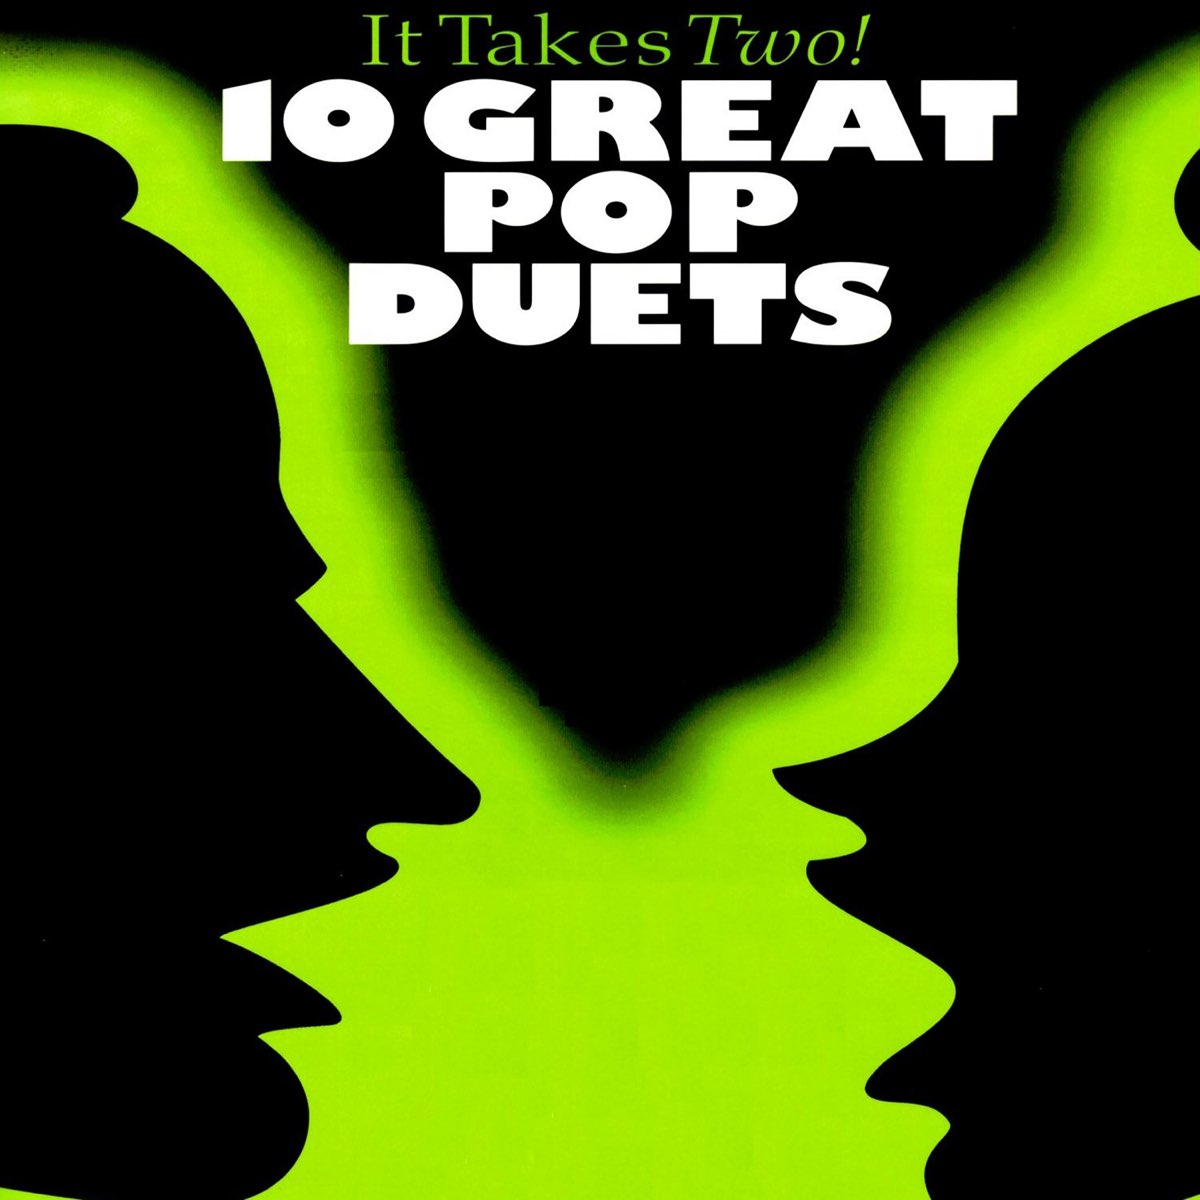 It Takes Two: 10 Great Pop Duets - Album by The Backing Tracks - Apple Music